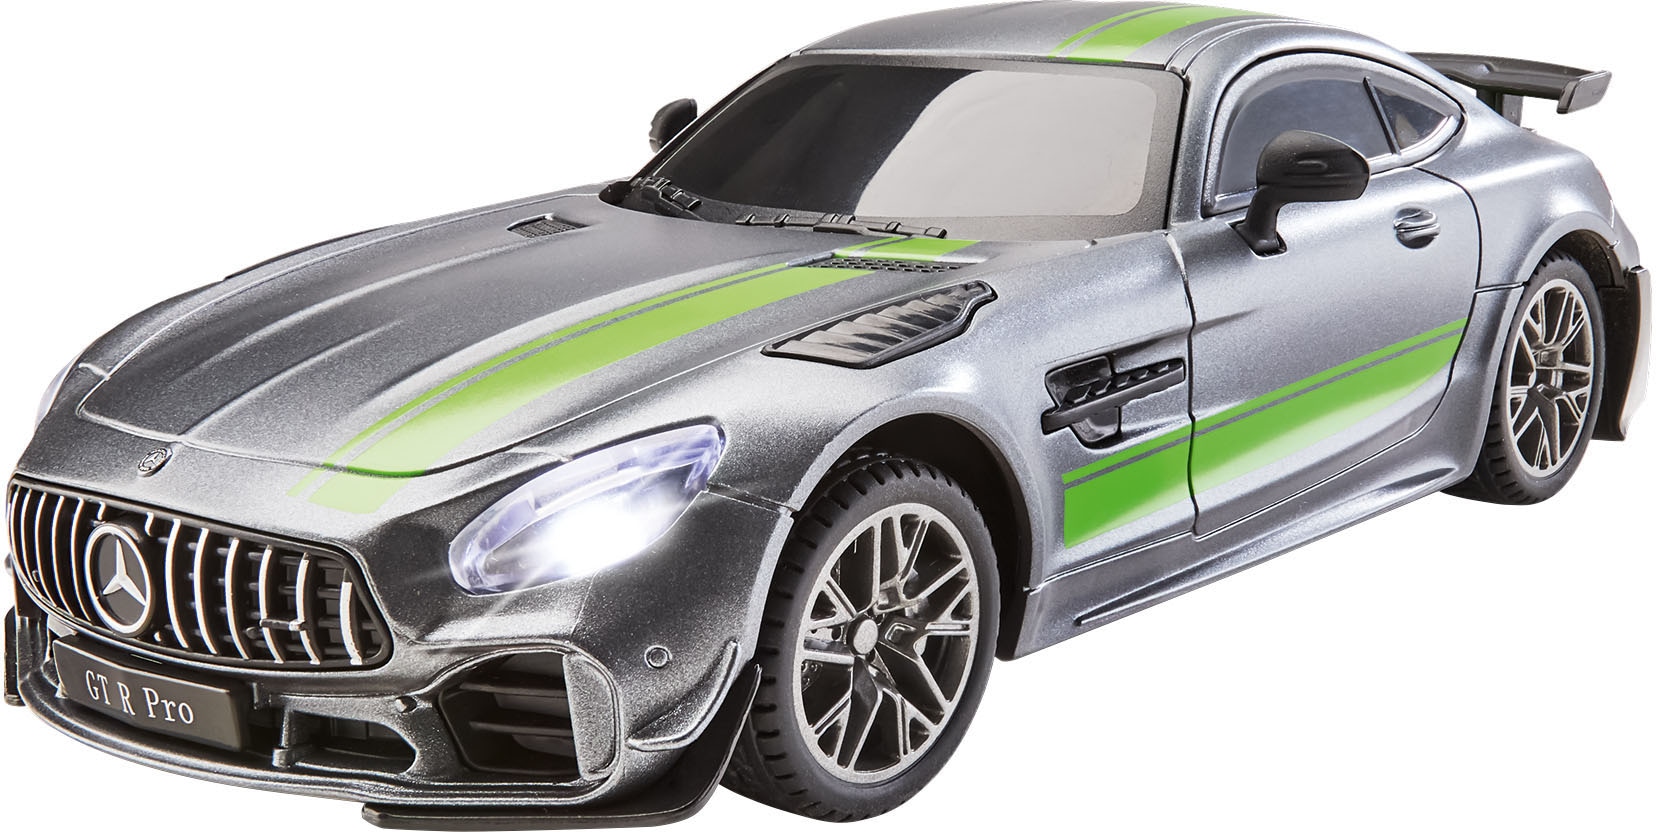 Revell® RC-Auto »Revell® control, RC Mercedes-AMG GT R Pro«